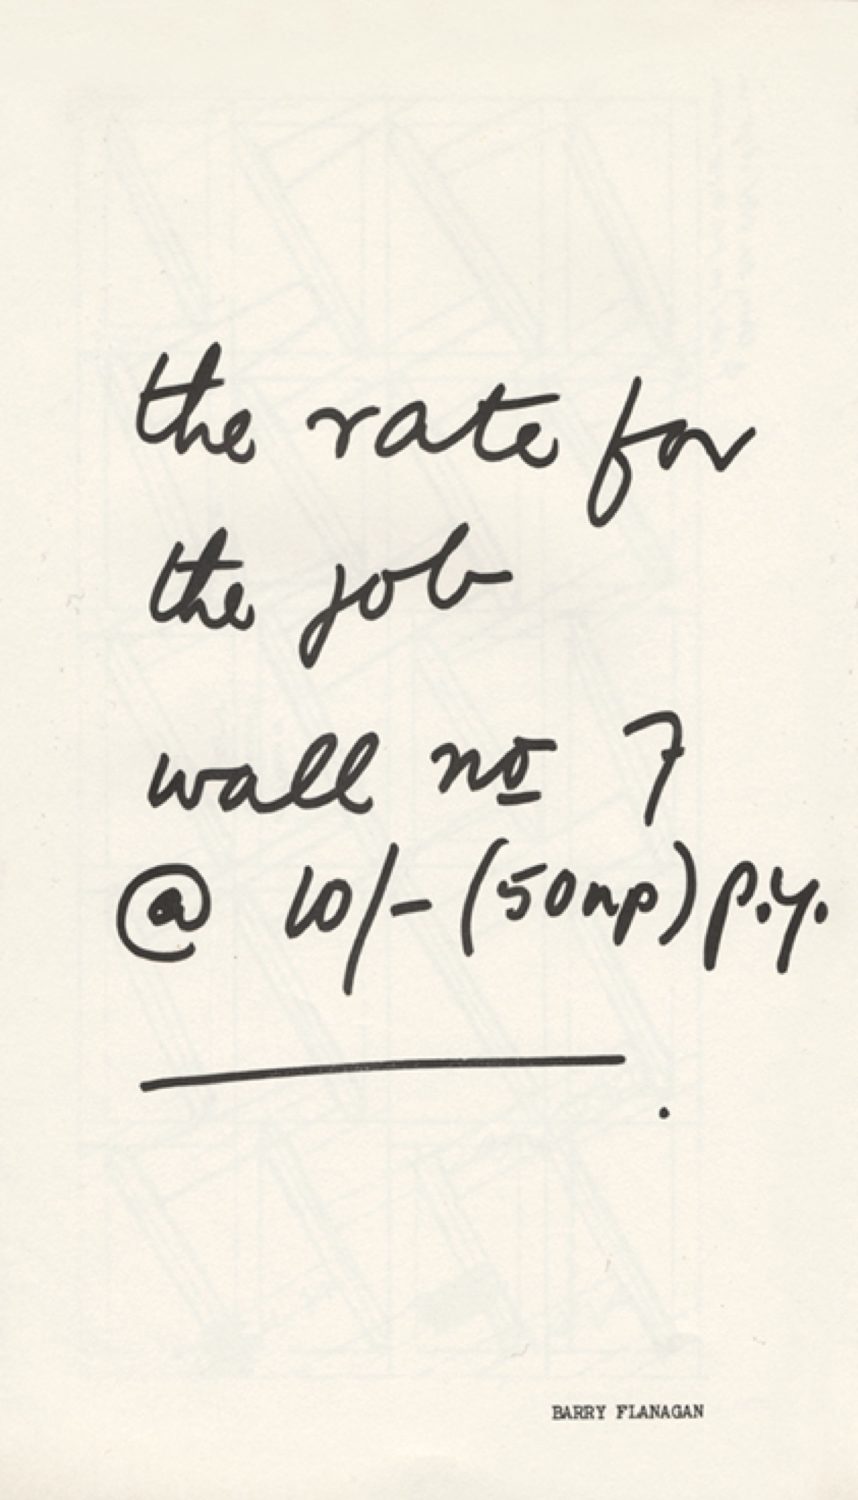 the rate for the job wall no 7 @ 10/- (50np) p.y